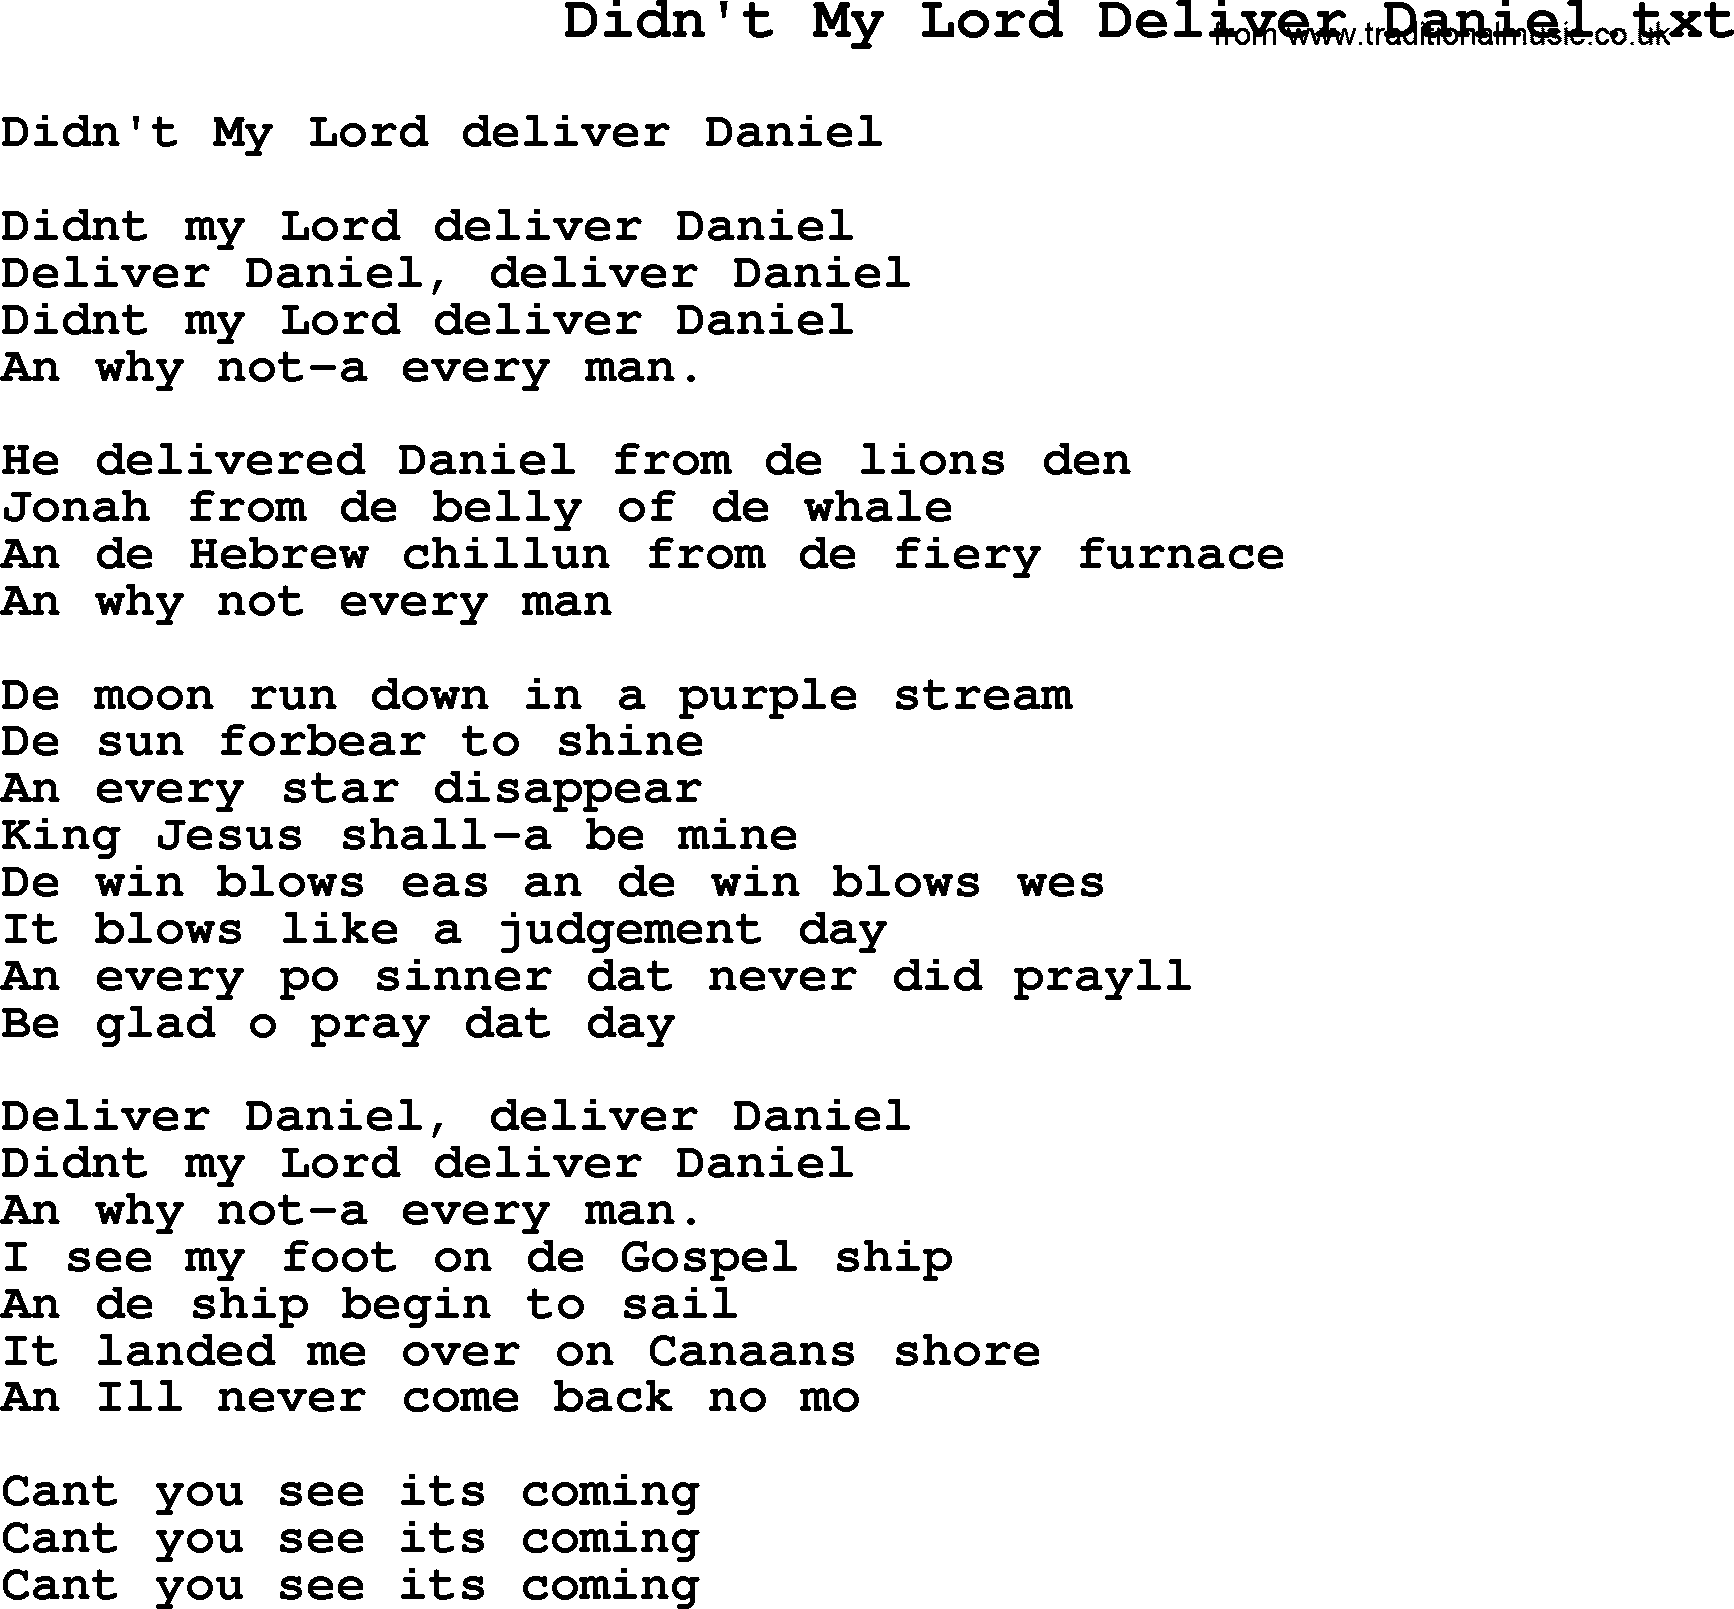 Negro Spiritual Song Lyrics for Didn't My Lord Deliver Daniel